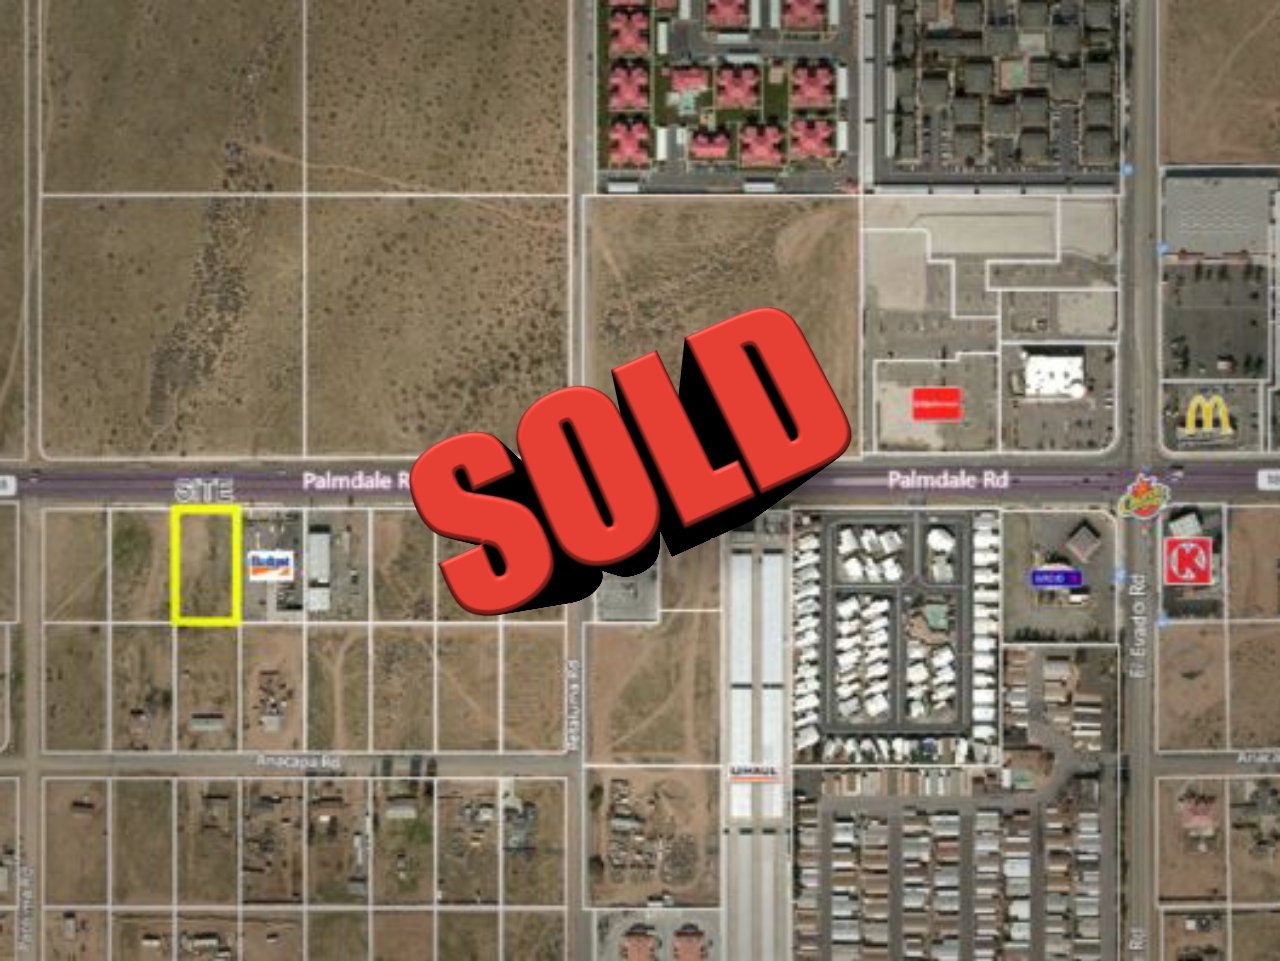 1 Acre of Commercial Land Palmdale Rd Victorville, CA Sold